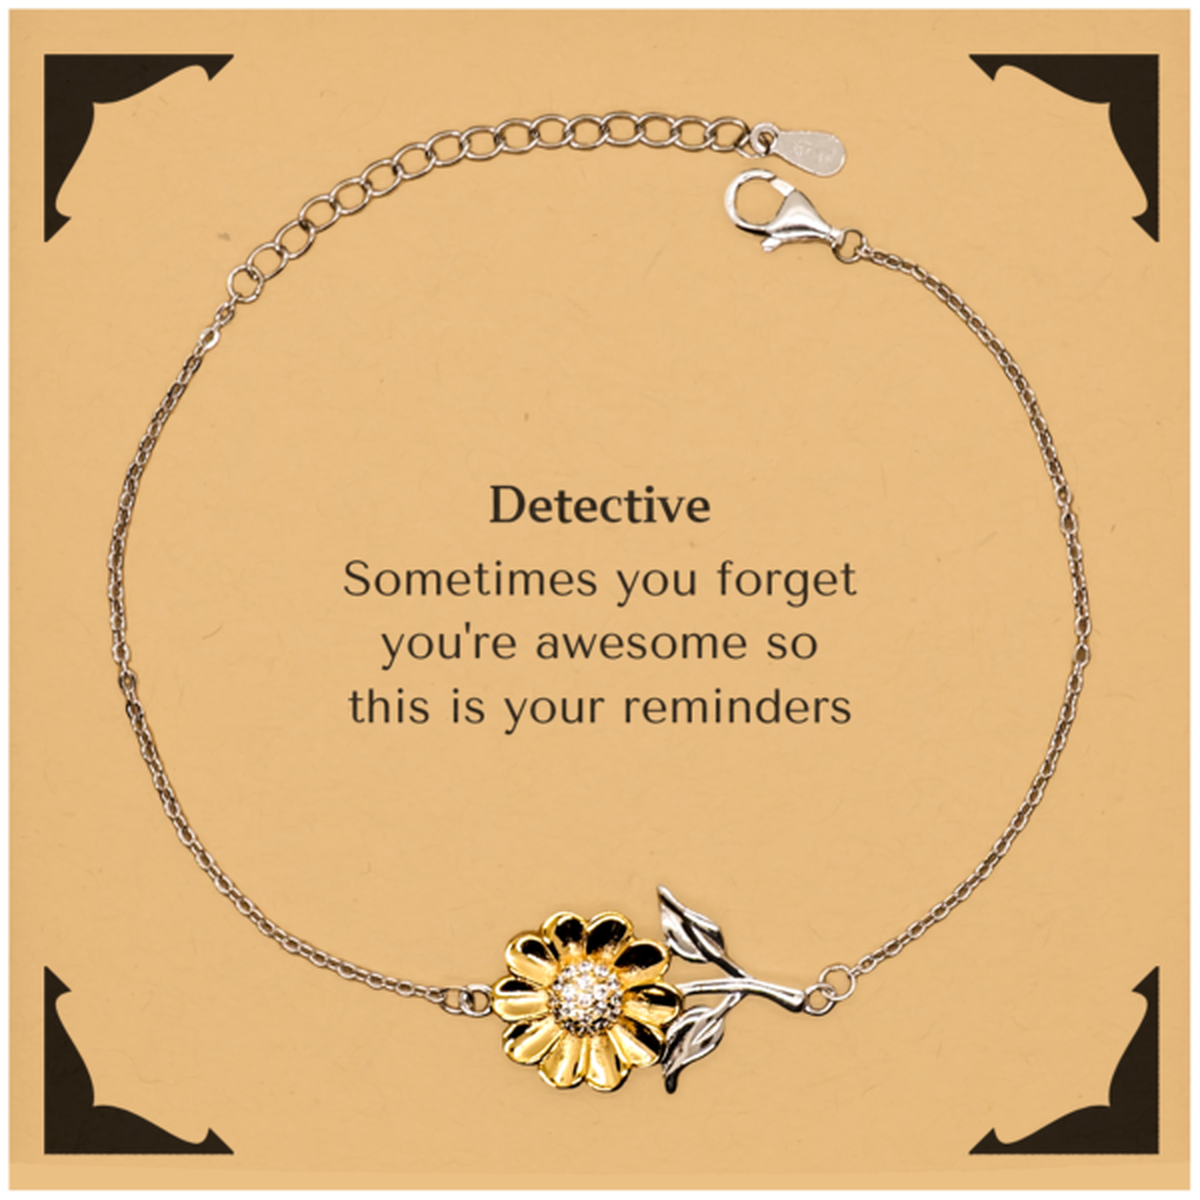 Sentimental Detective Sunflower Bracelet, Detective Sometimes you forget you're awesome so this is your reminders, Graduation Christmas Birthday Gifts for Detective, Men, Women, Coworkers